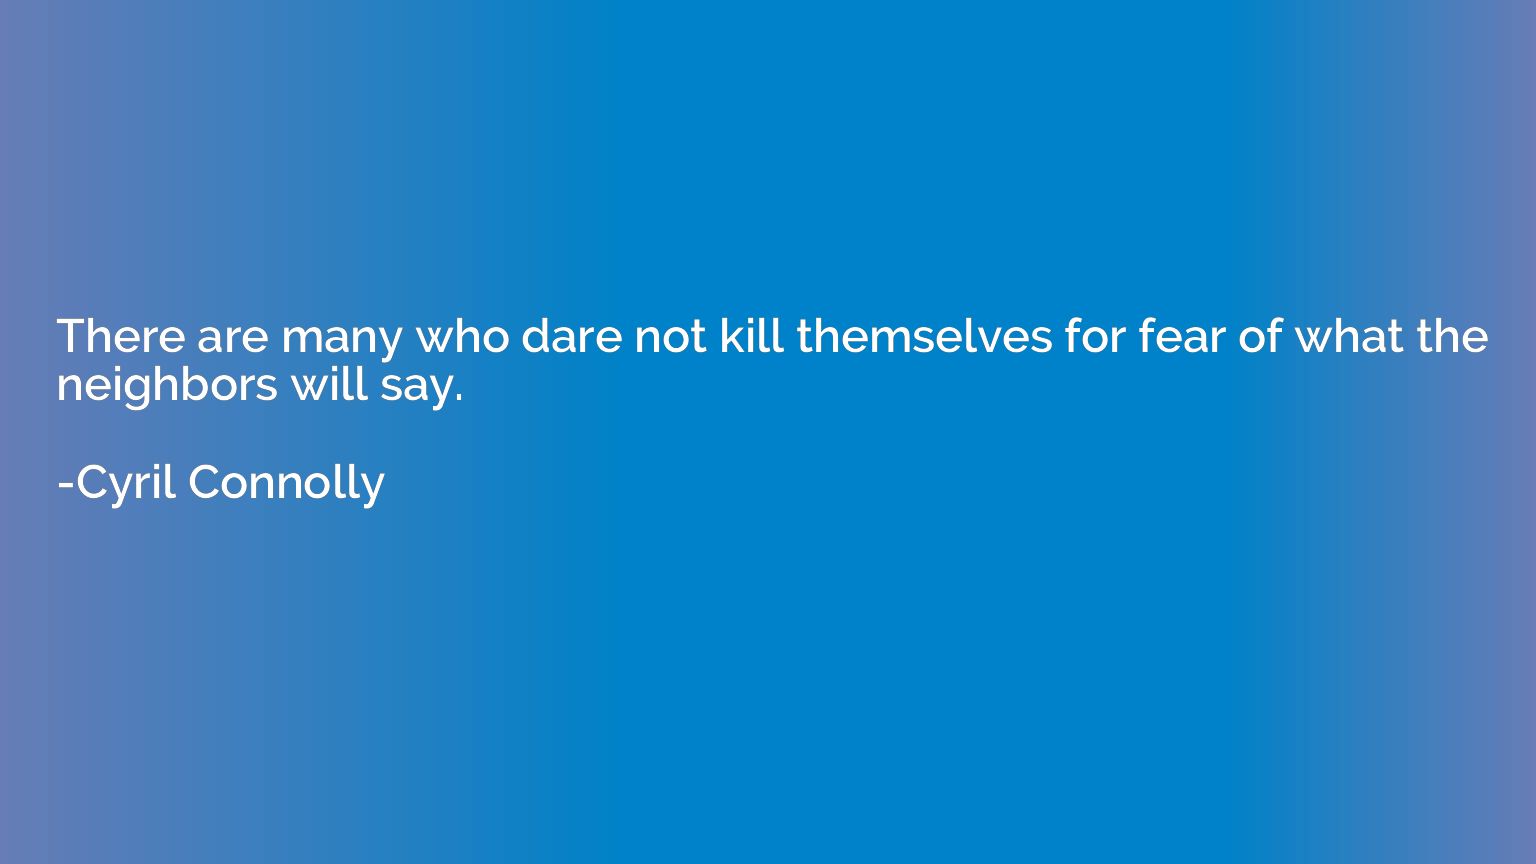 There are many who dare not kill themselves for fear of what